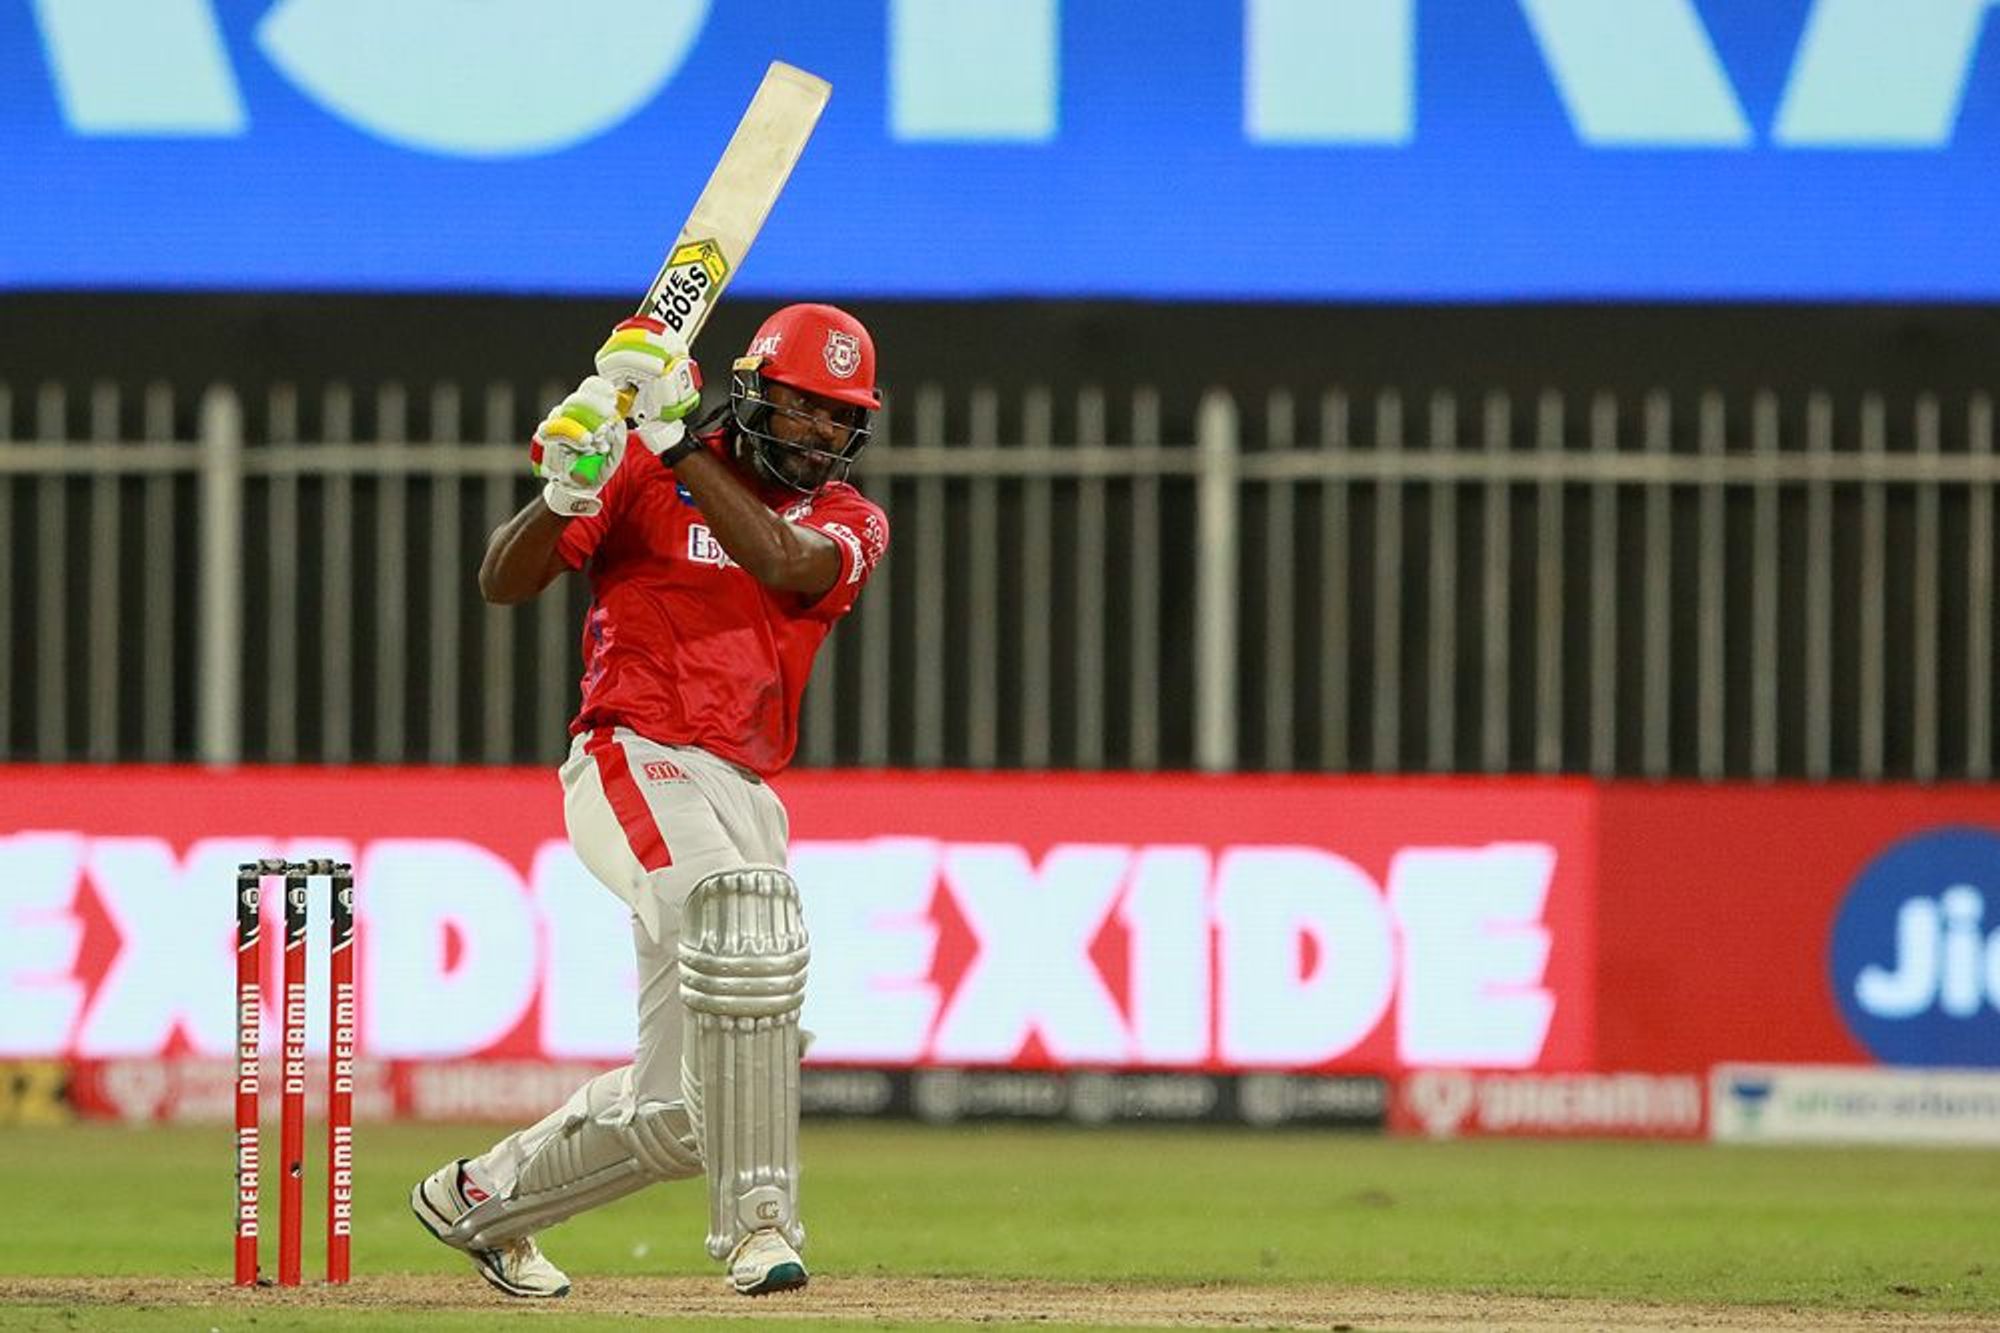 Chris Gayle has brought new life to KXIP outfit | BCCI/IPL